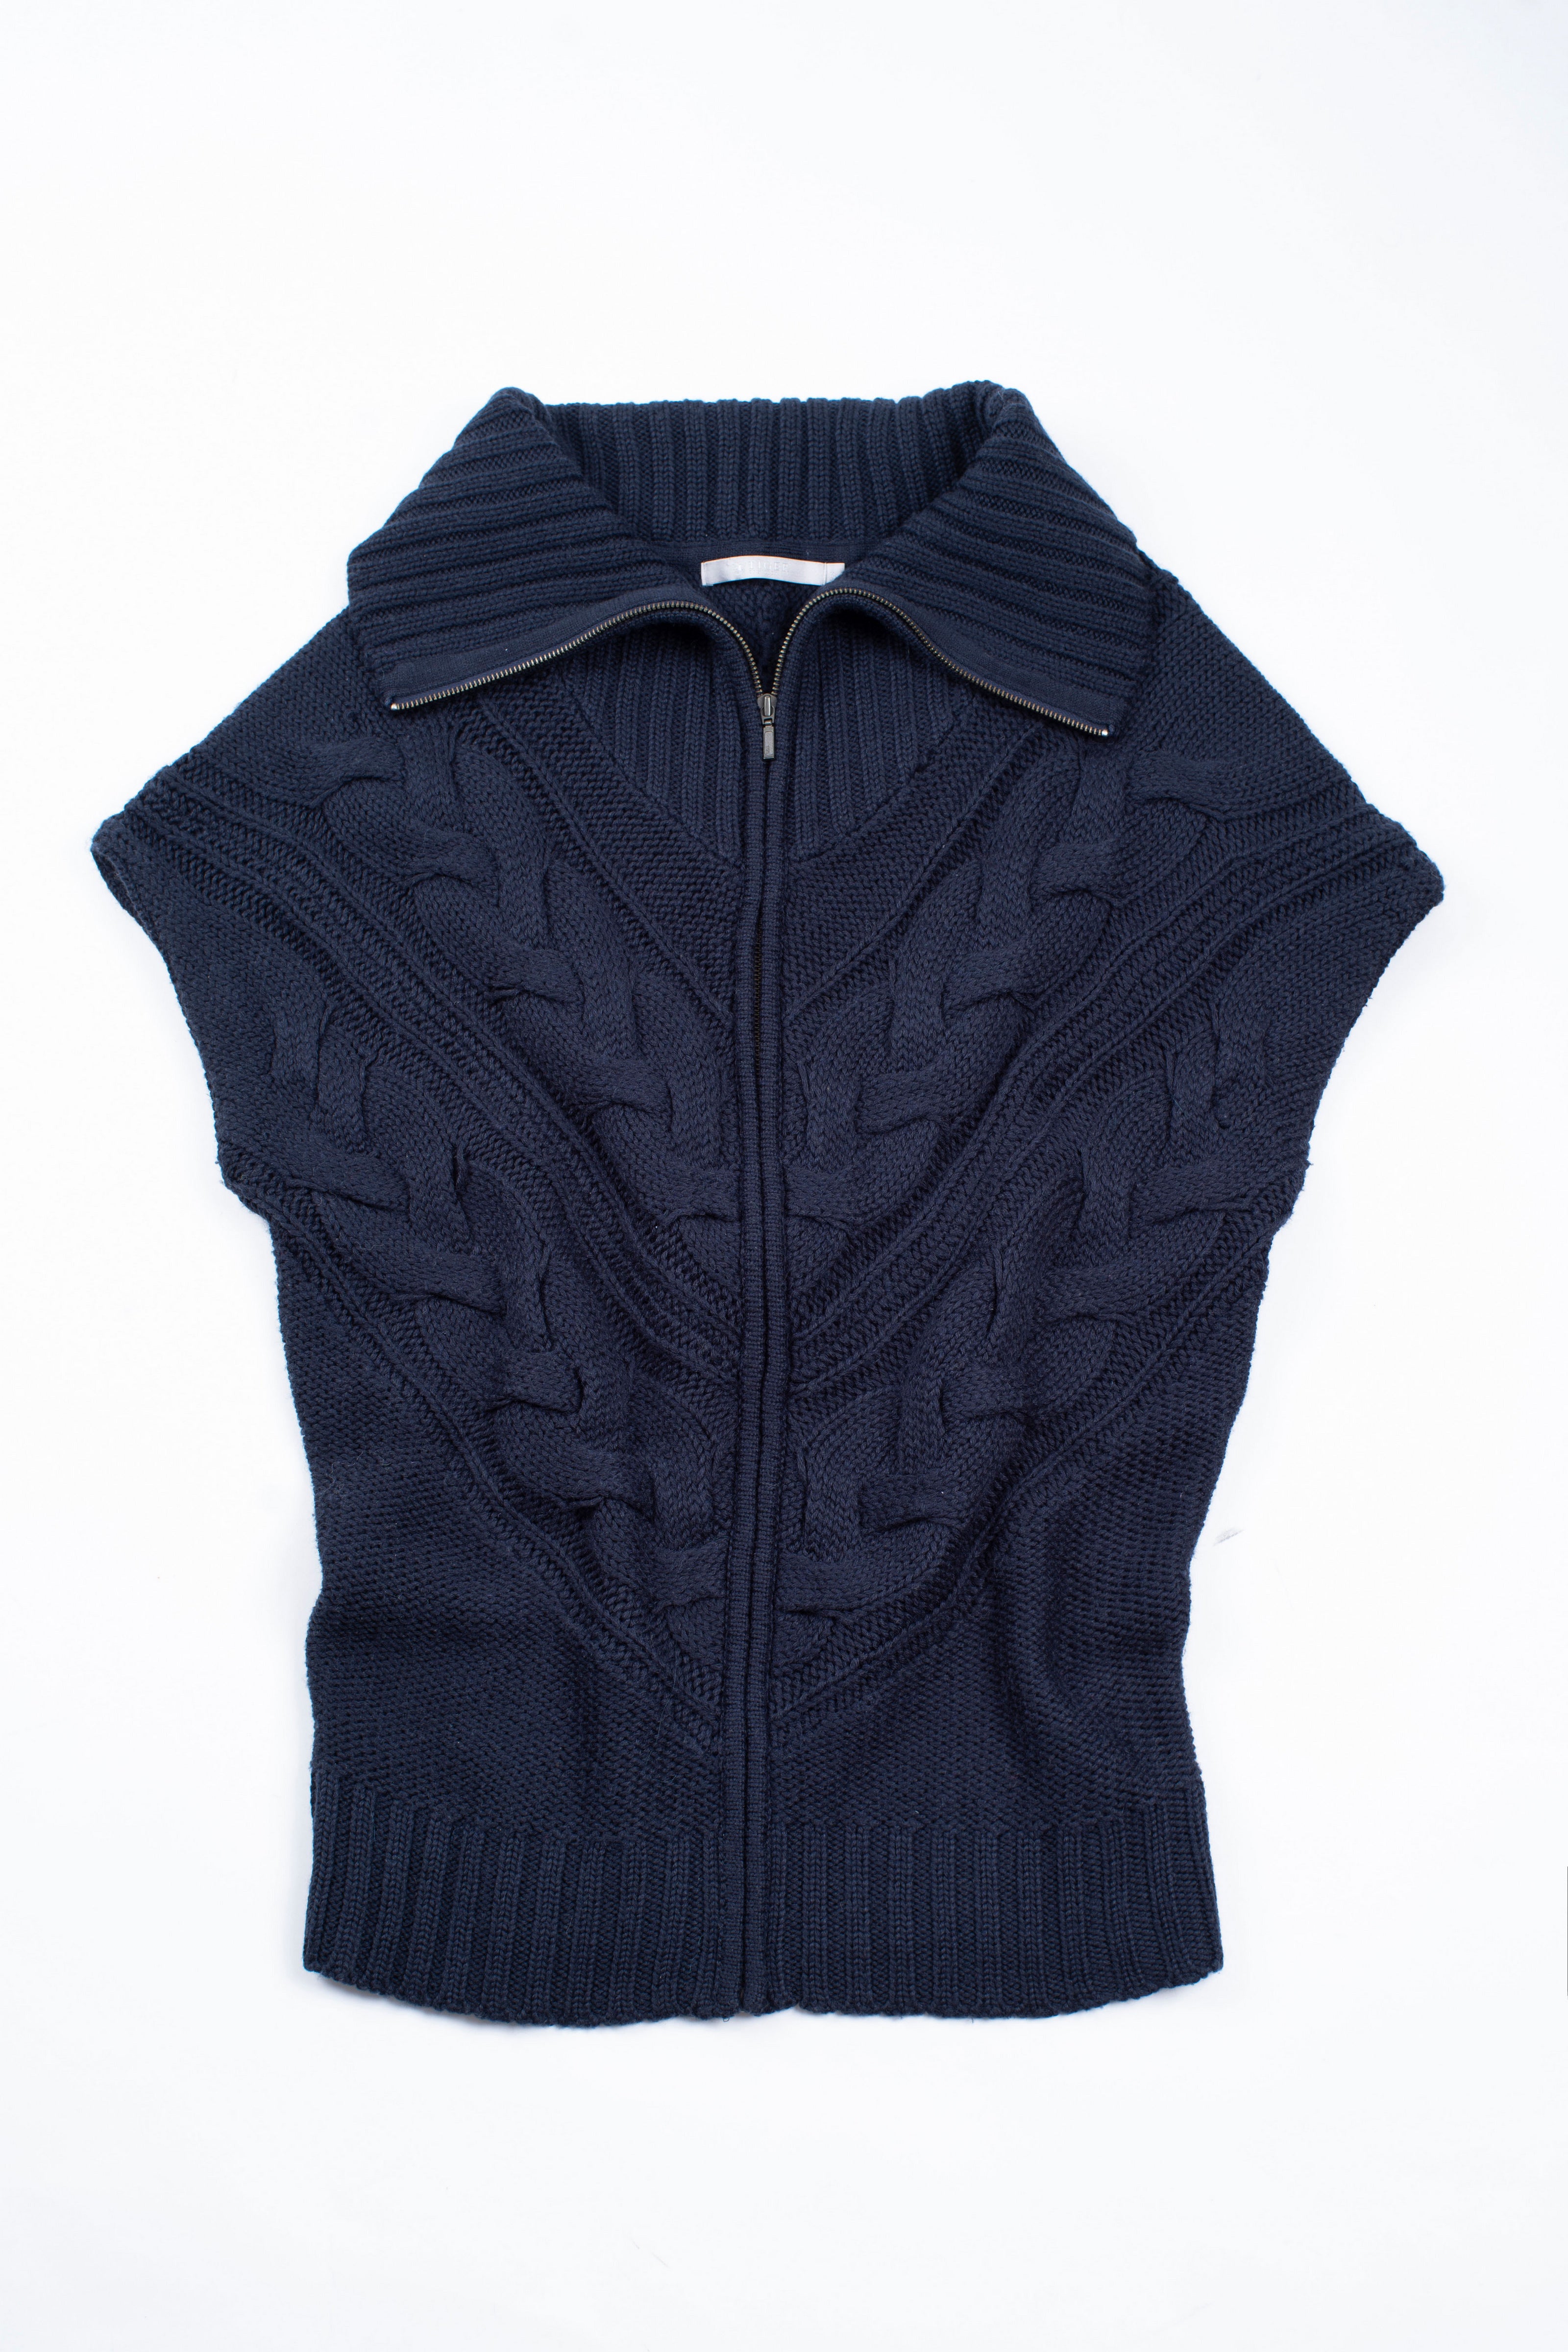 Tiger of Sweden Women's Blue Wool Cable Knit Zip Vest, SIZE S